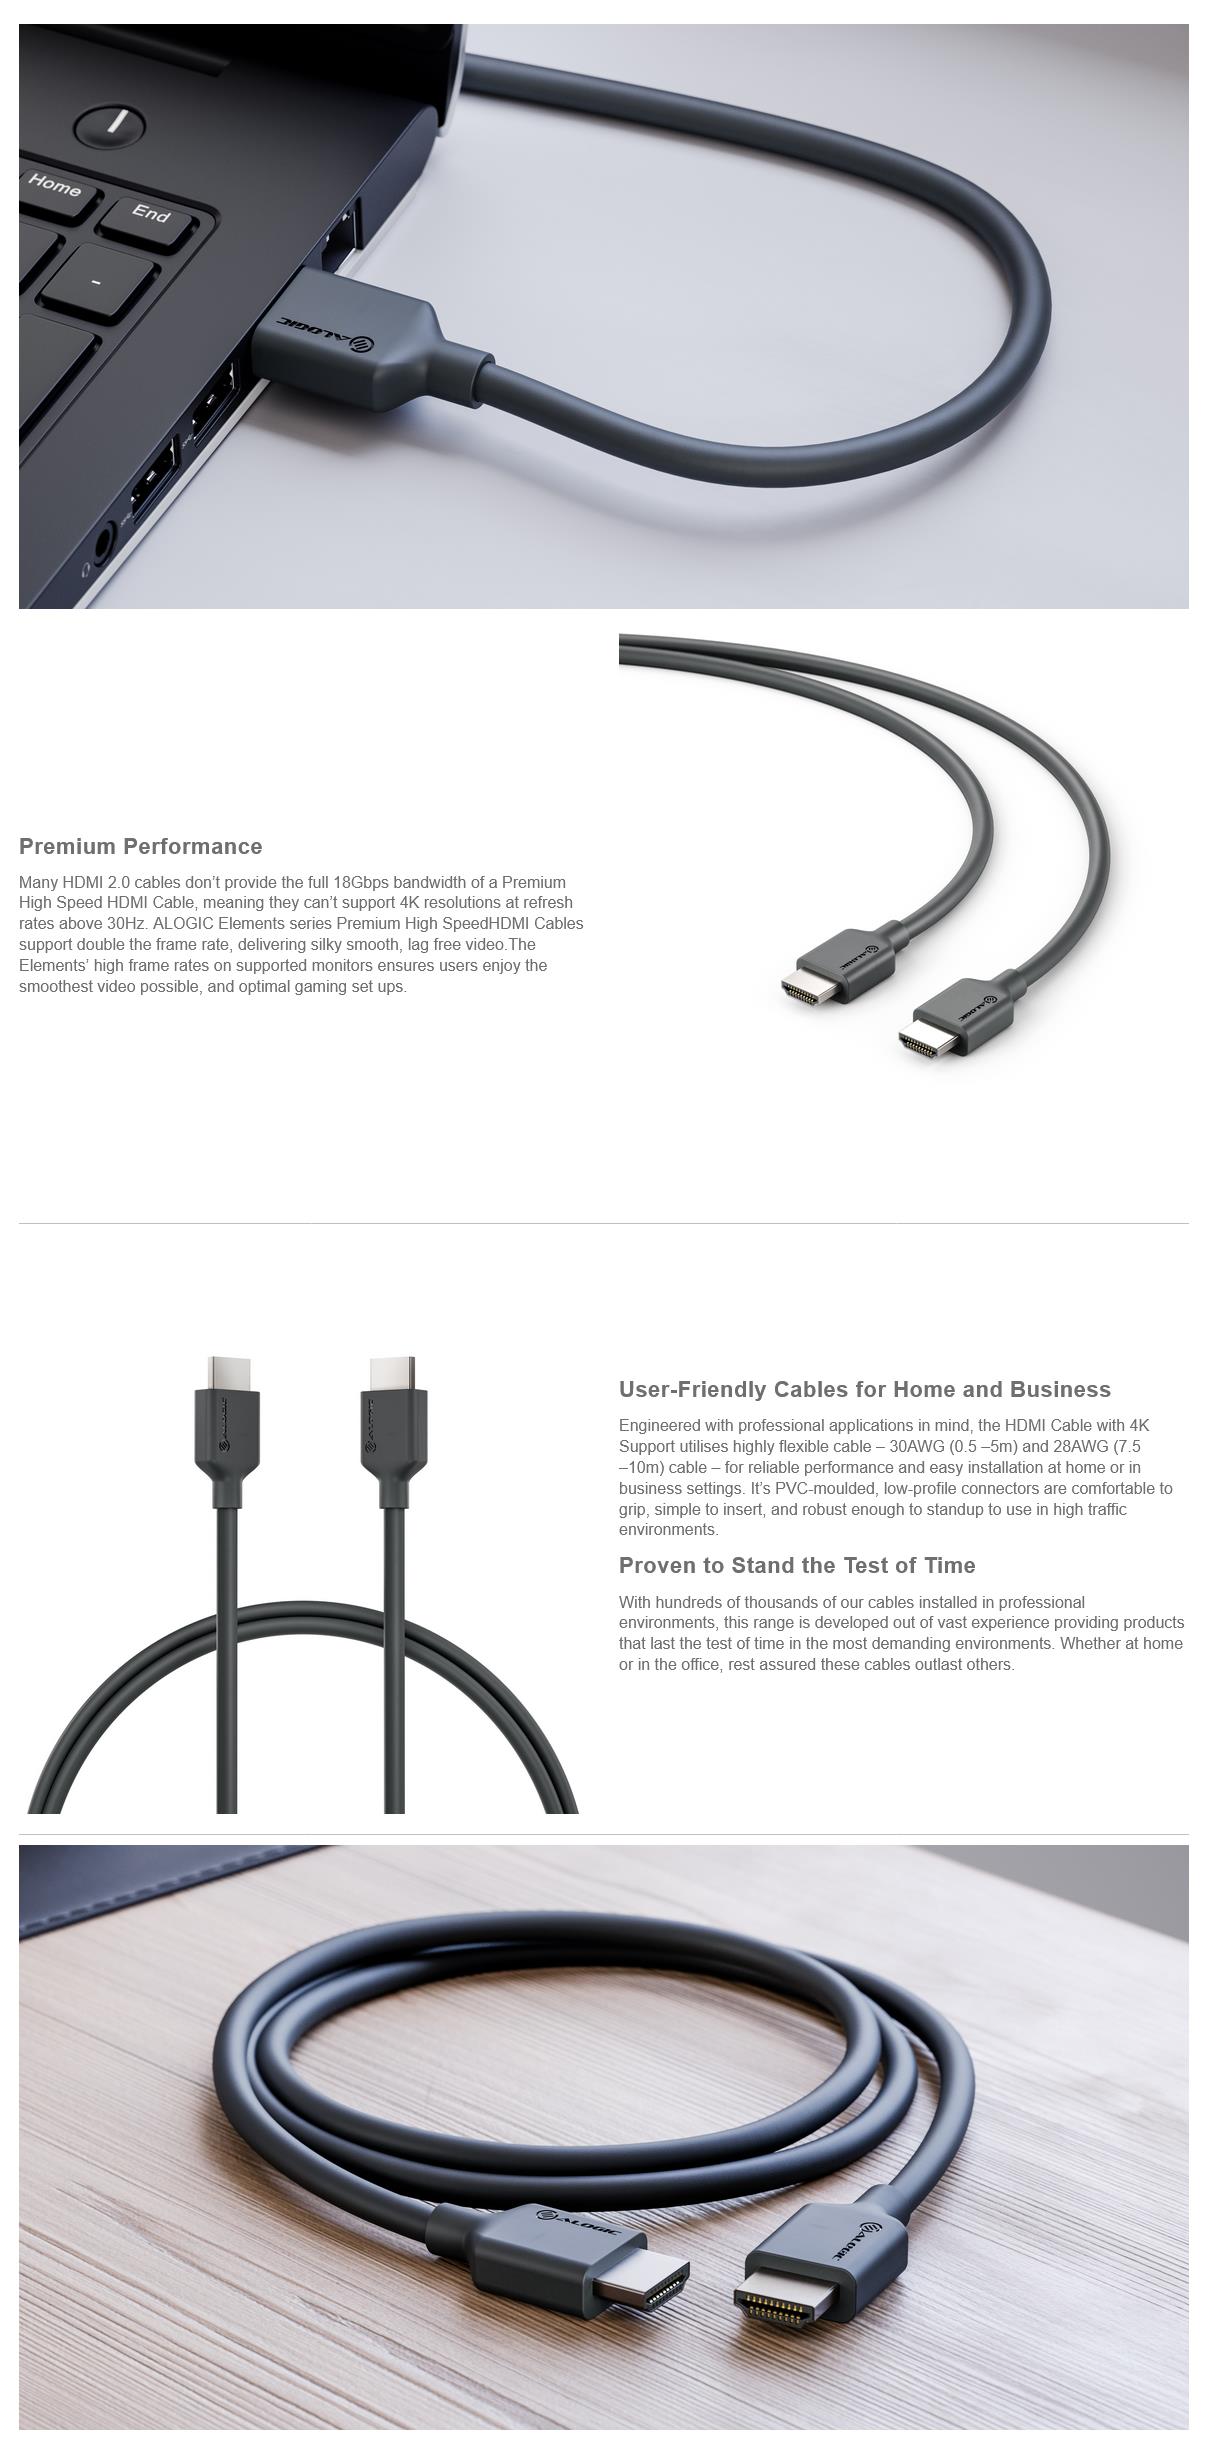 A large marketing image providing additional information about the product ALOGIC Elements High Speed 50cm HDMI Cable with 4K and Ethernet - Additional alt info not provided